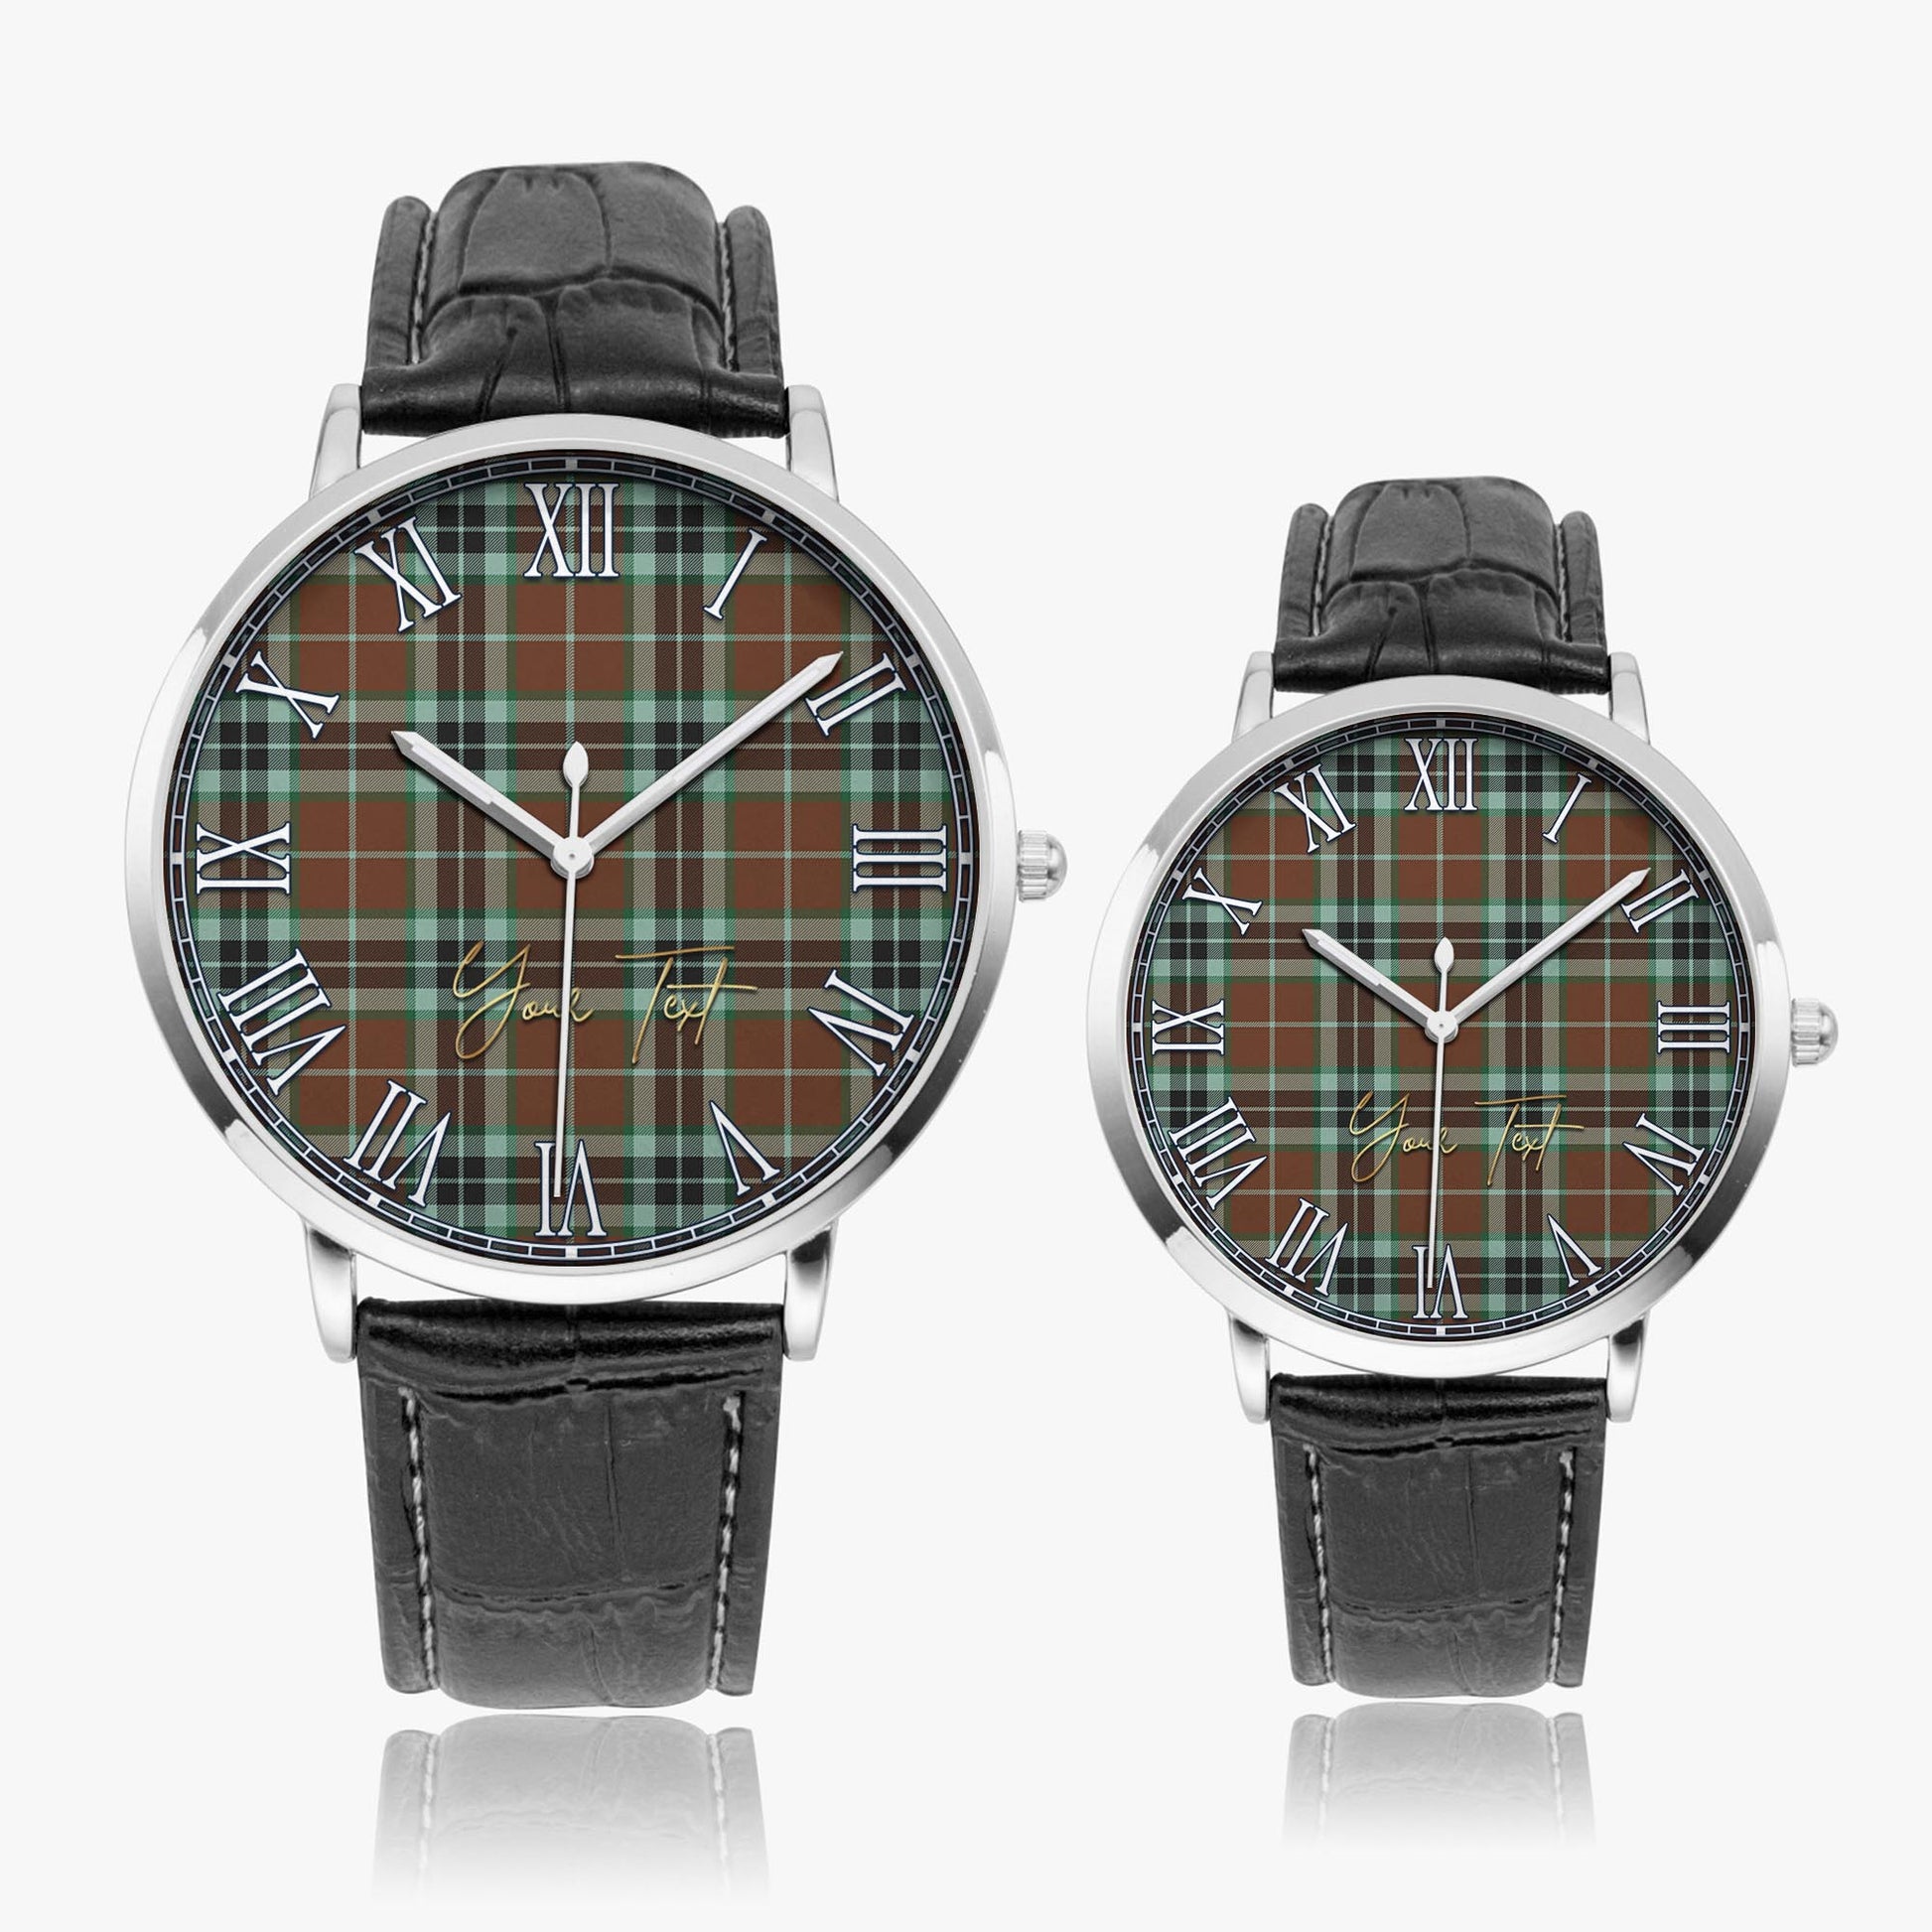 Thomson Hunting Modern Tartan Personalized Your Text Leather Trap Quartz Watch Ultra Thin Silver Case With Black Leather Strap - Tartanvibesclothing Shop